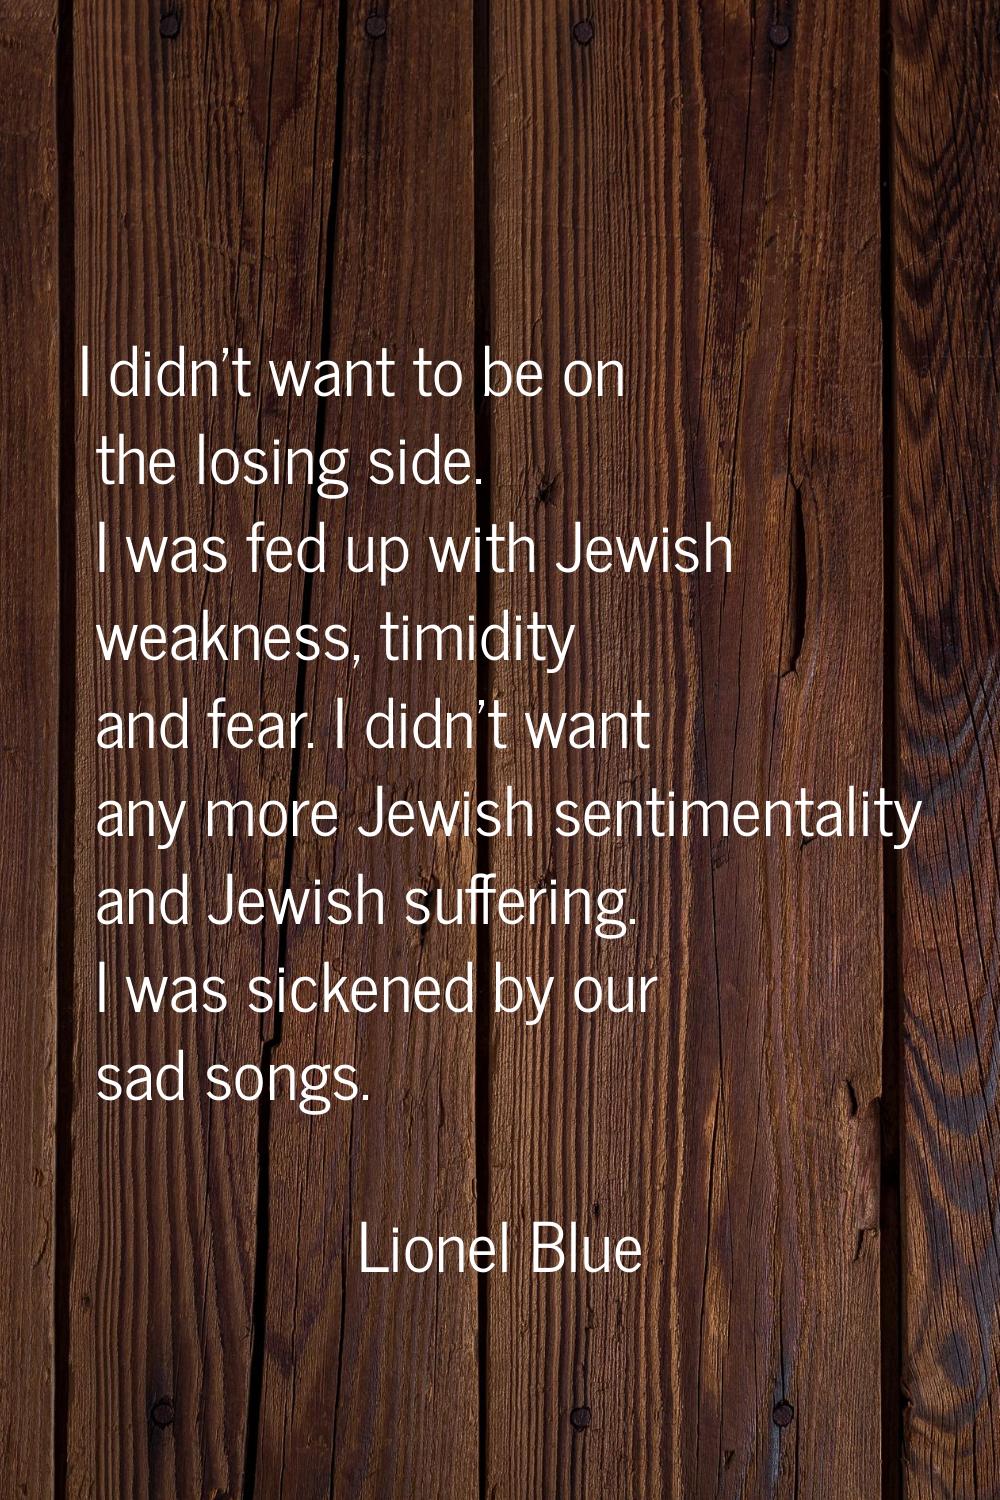 I didn't want to be on the losing side. I was fed up with Jewish weakness, timidity and fear. I did